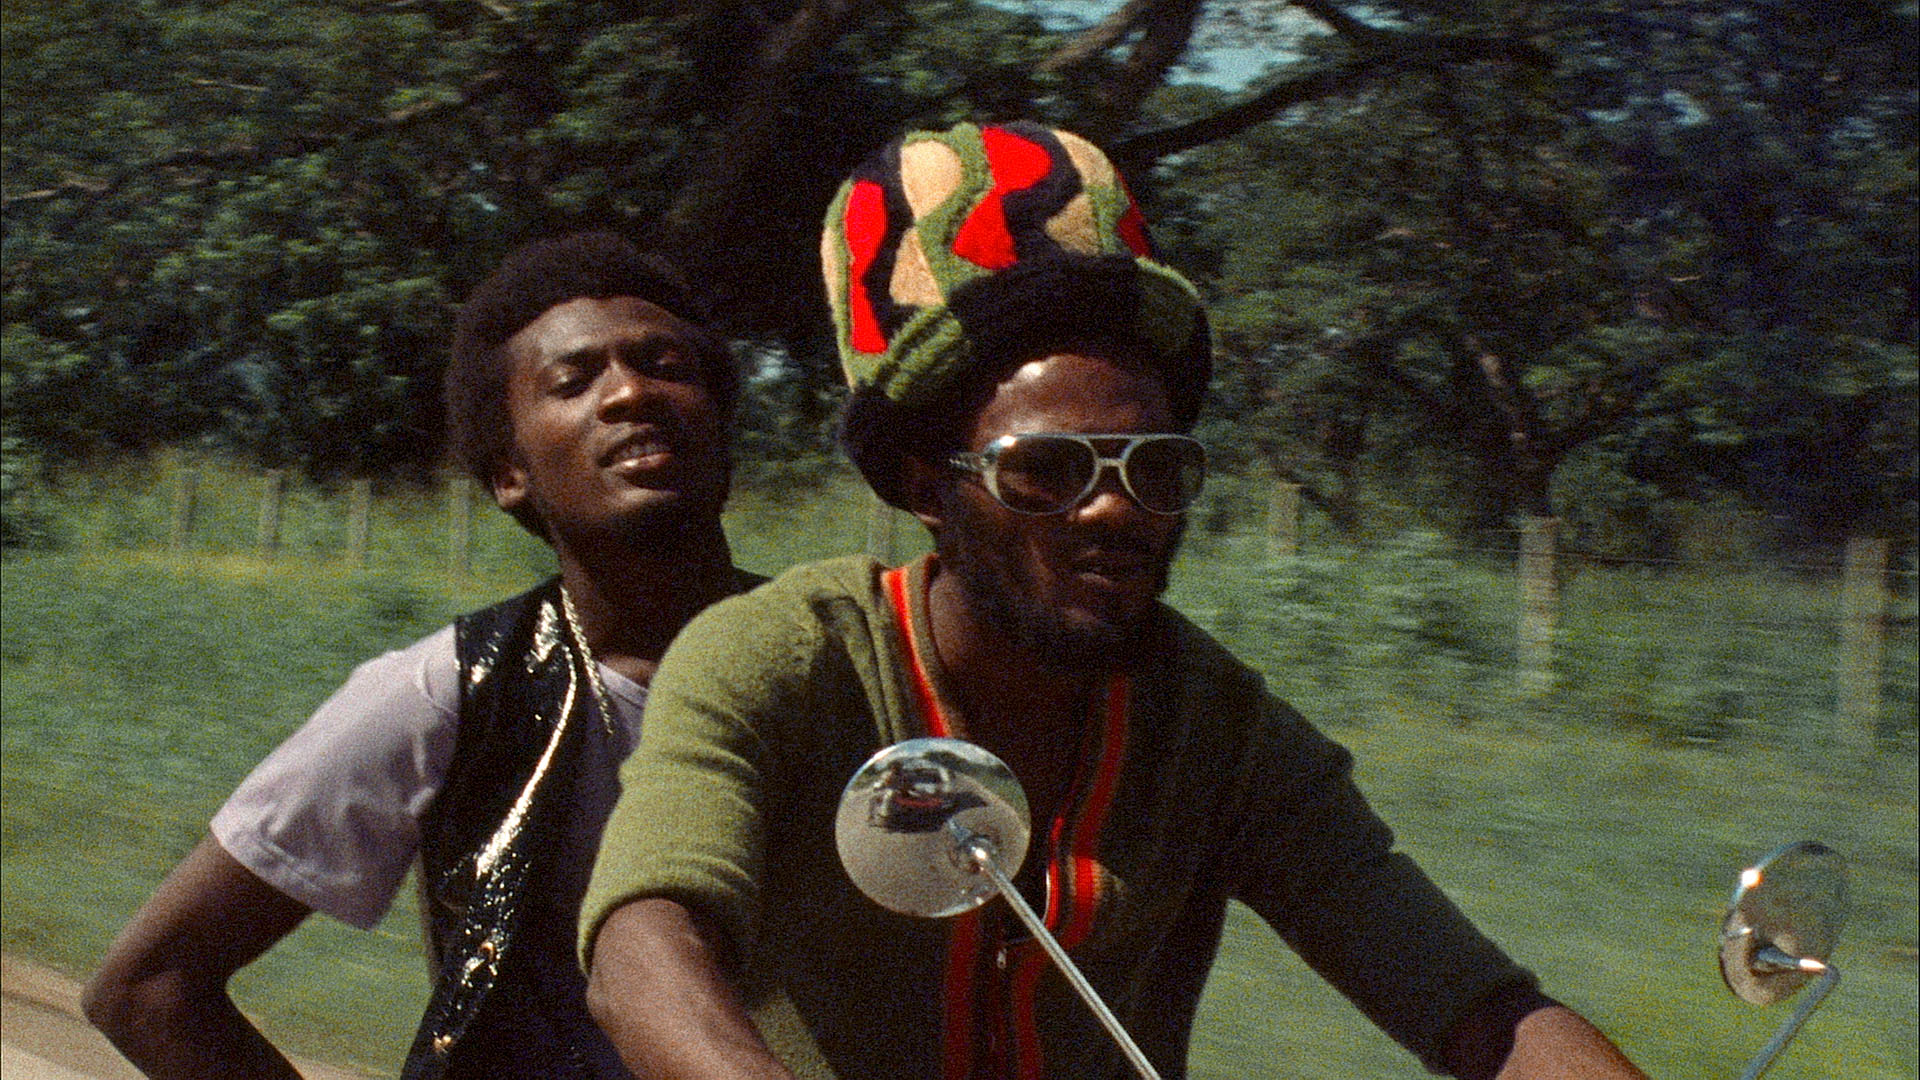 Revisiting The Harder They Come, Jamaica’s first feature film